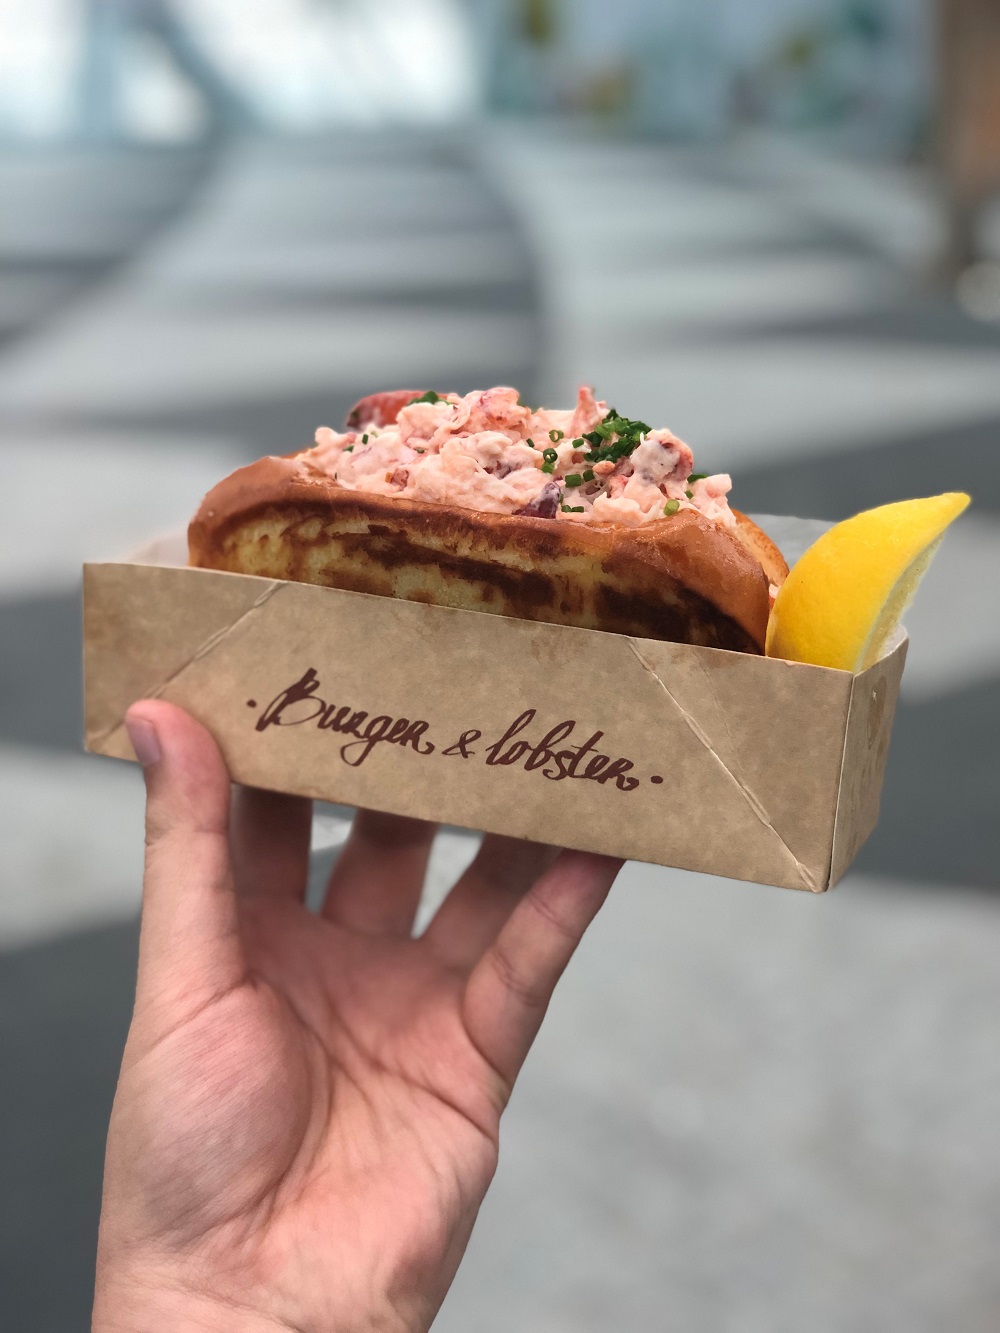 A shot of the delicious Lobster Roll